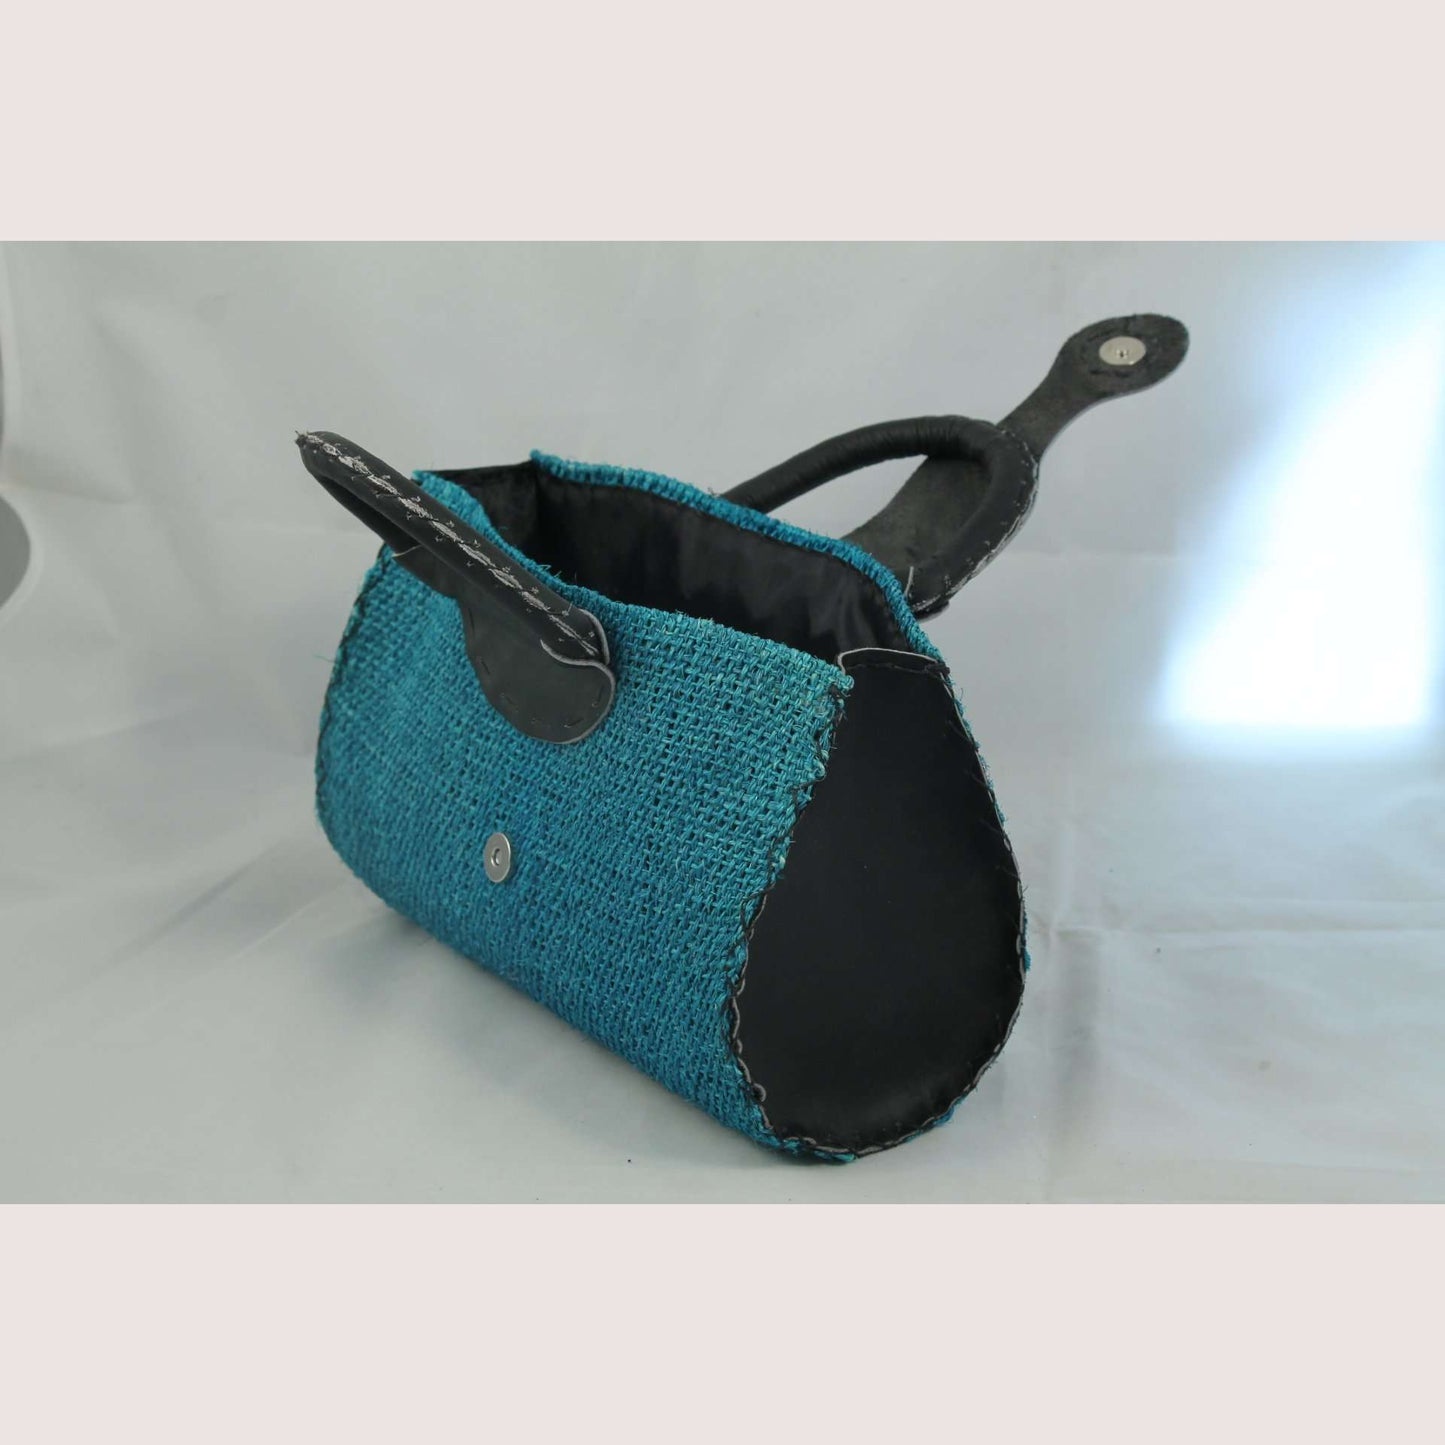 Purse/Bag/Tote Hand made Mexican Ixtle (cactus fiber) Turquoise